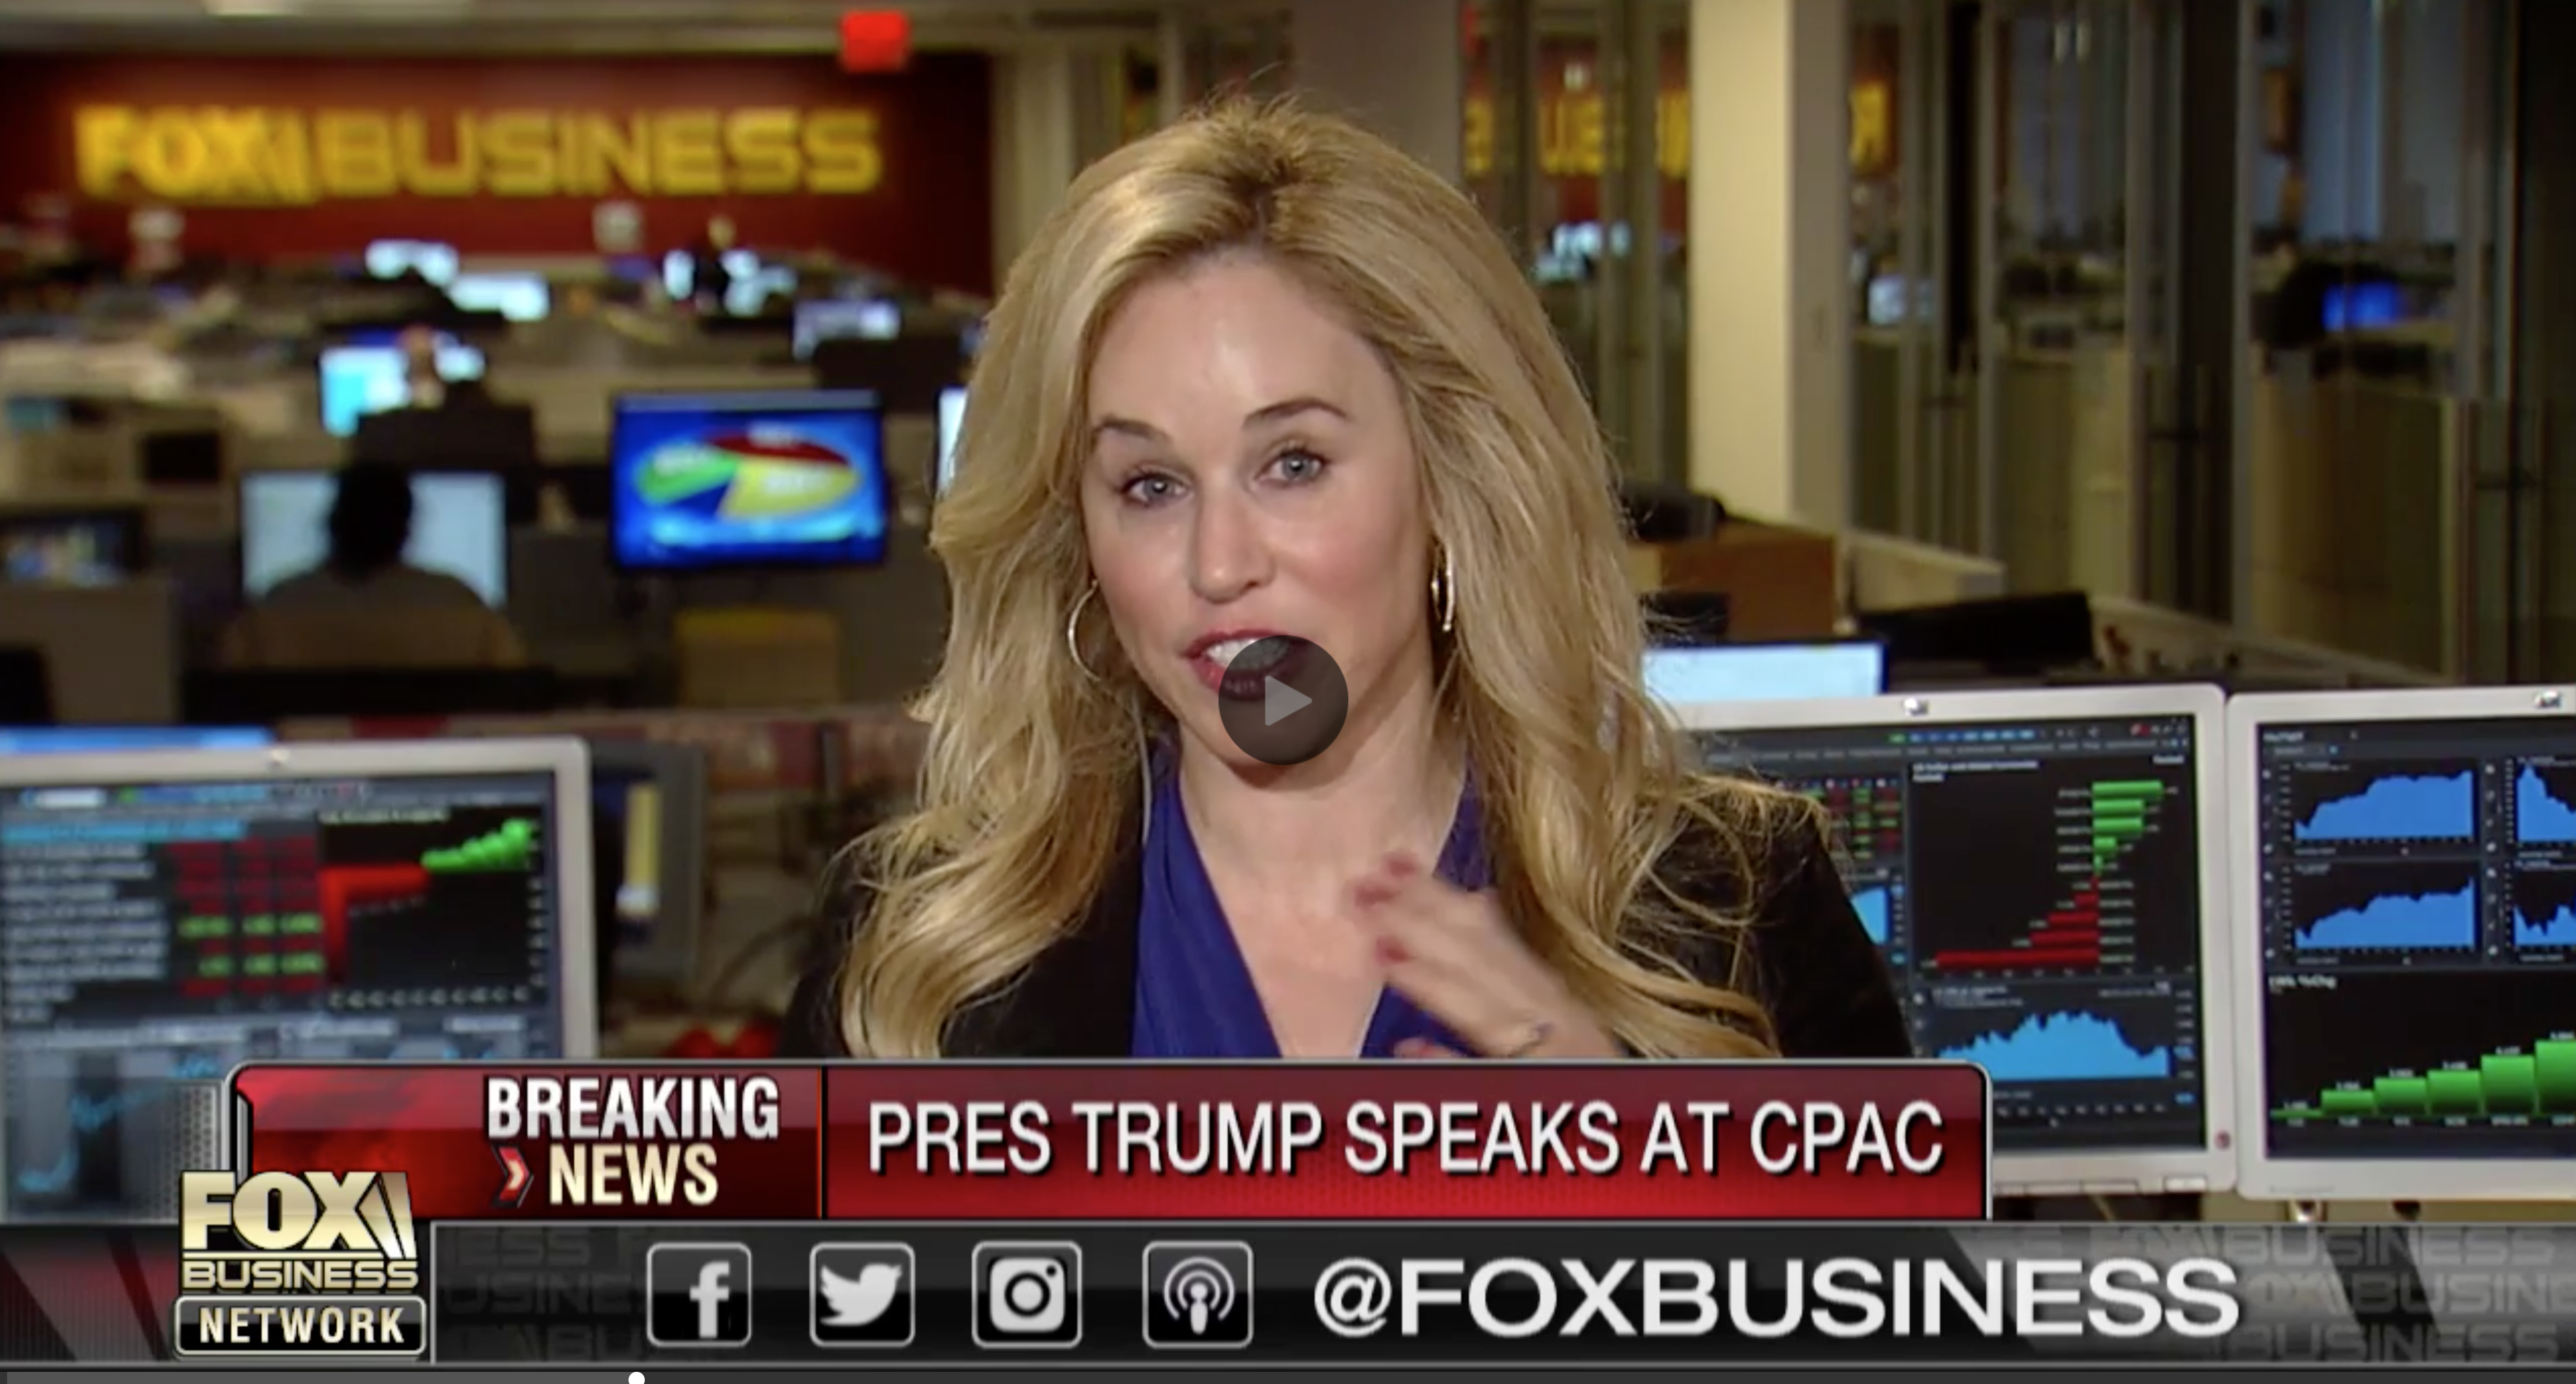 Lenore Hawkins joins Fox Business Neil Cavuto to discuss Trump’s Speech at CPAC